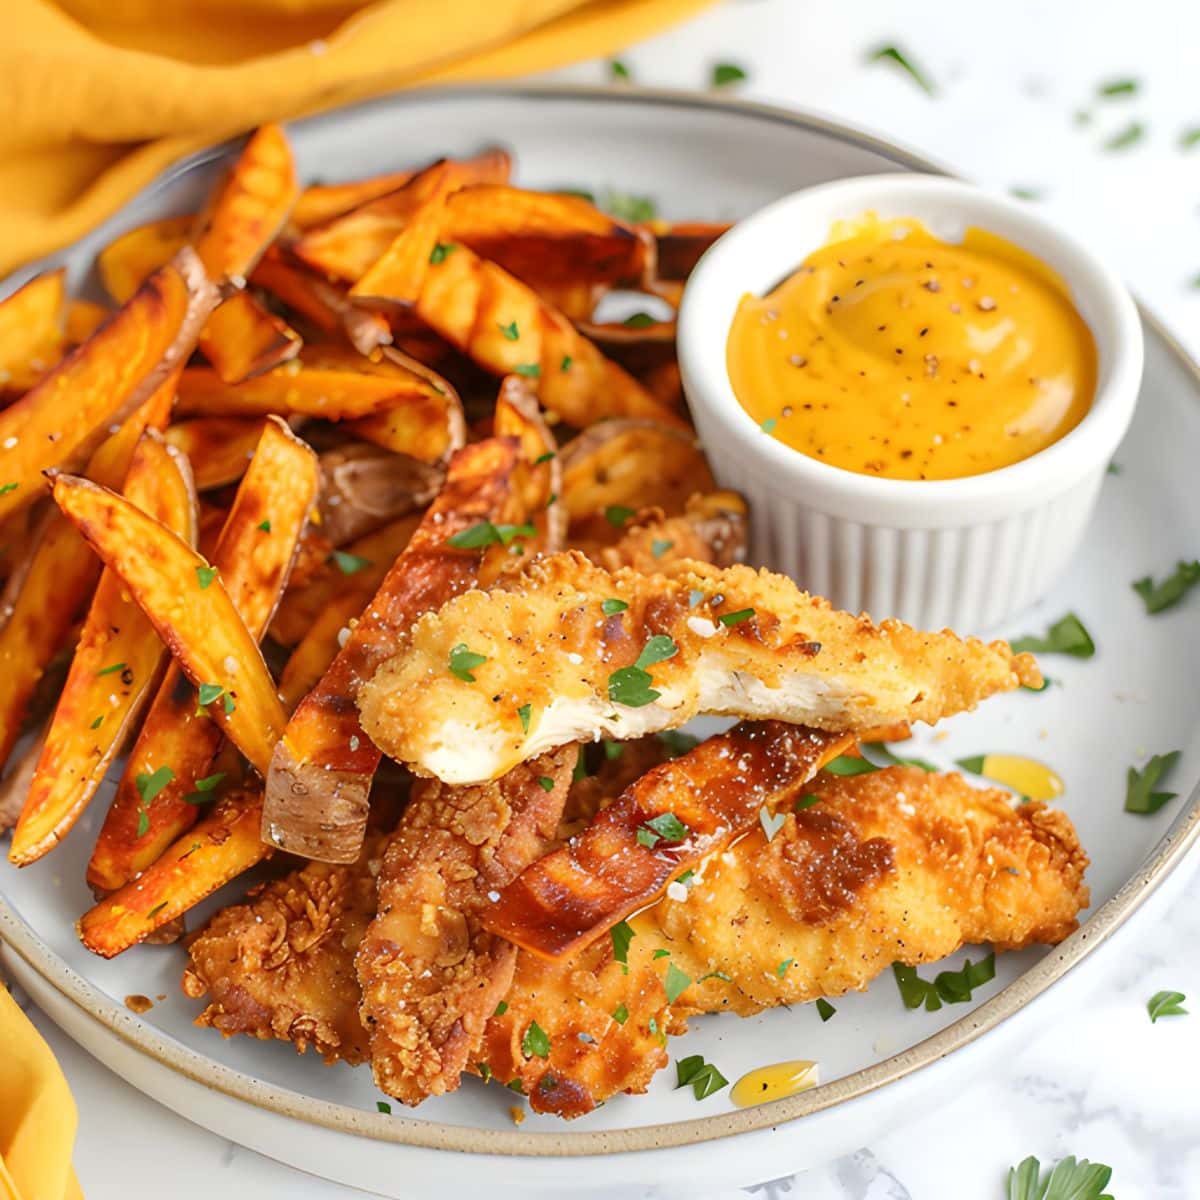 Chicken Tenders on a Plate with Sweet Potato Fries and a Ramekin of Honey Mustard with a Mustard Yellow Kitchen Towel